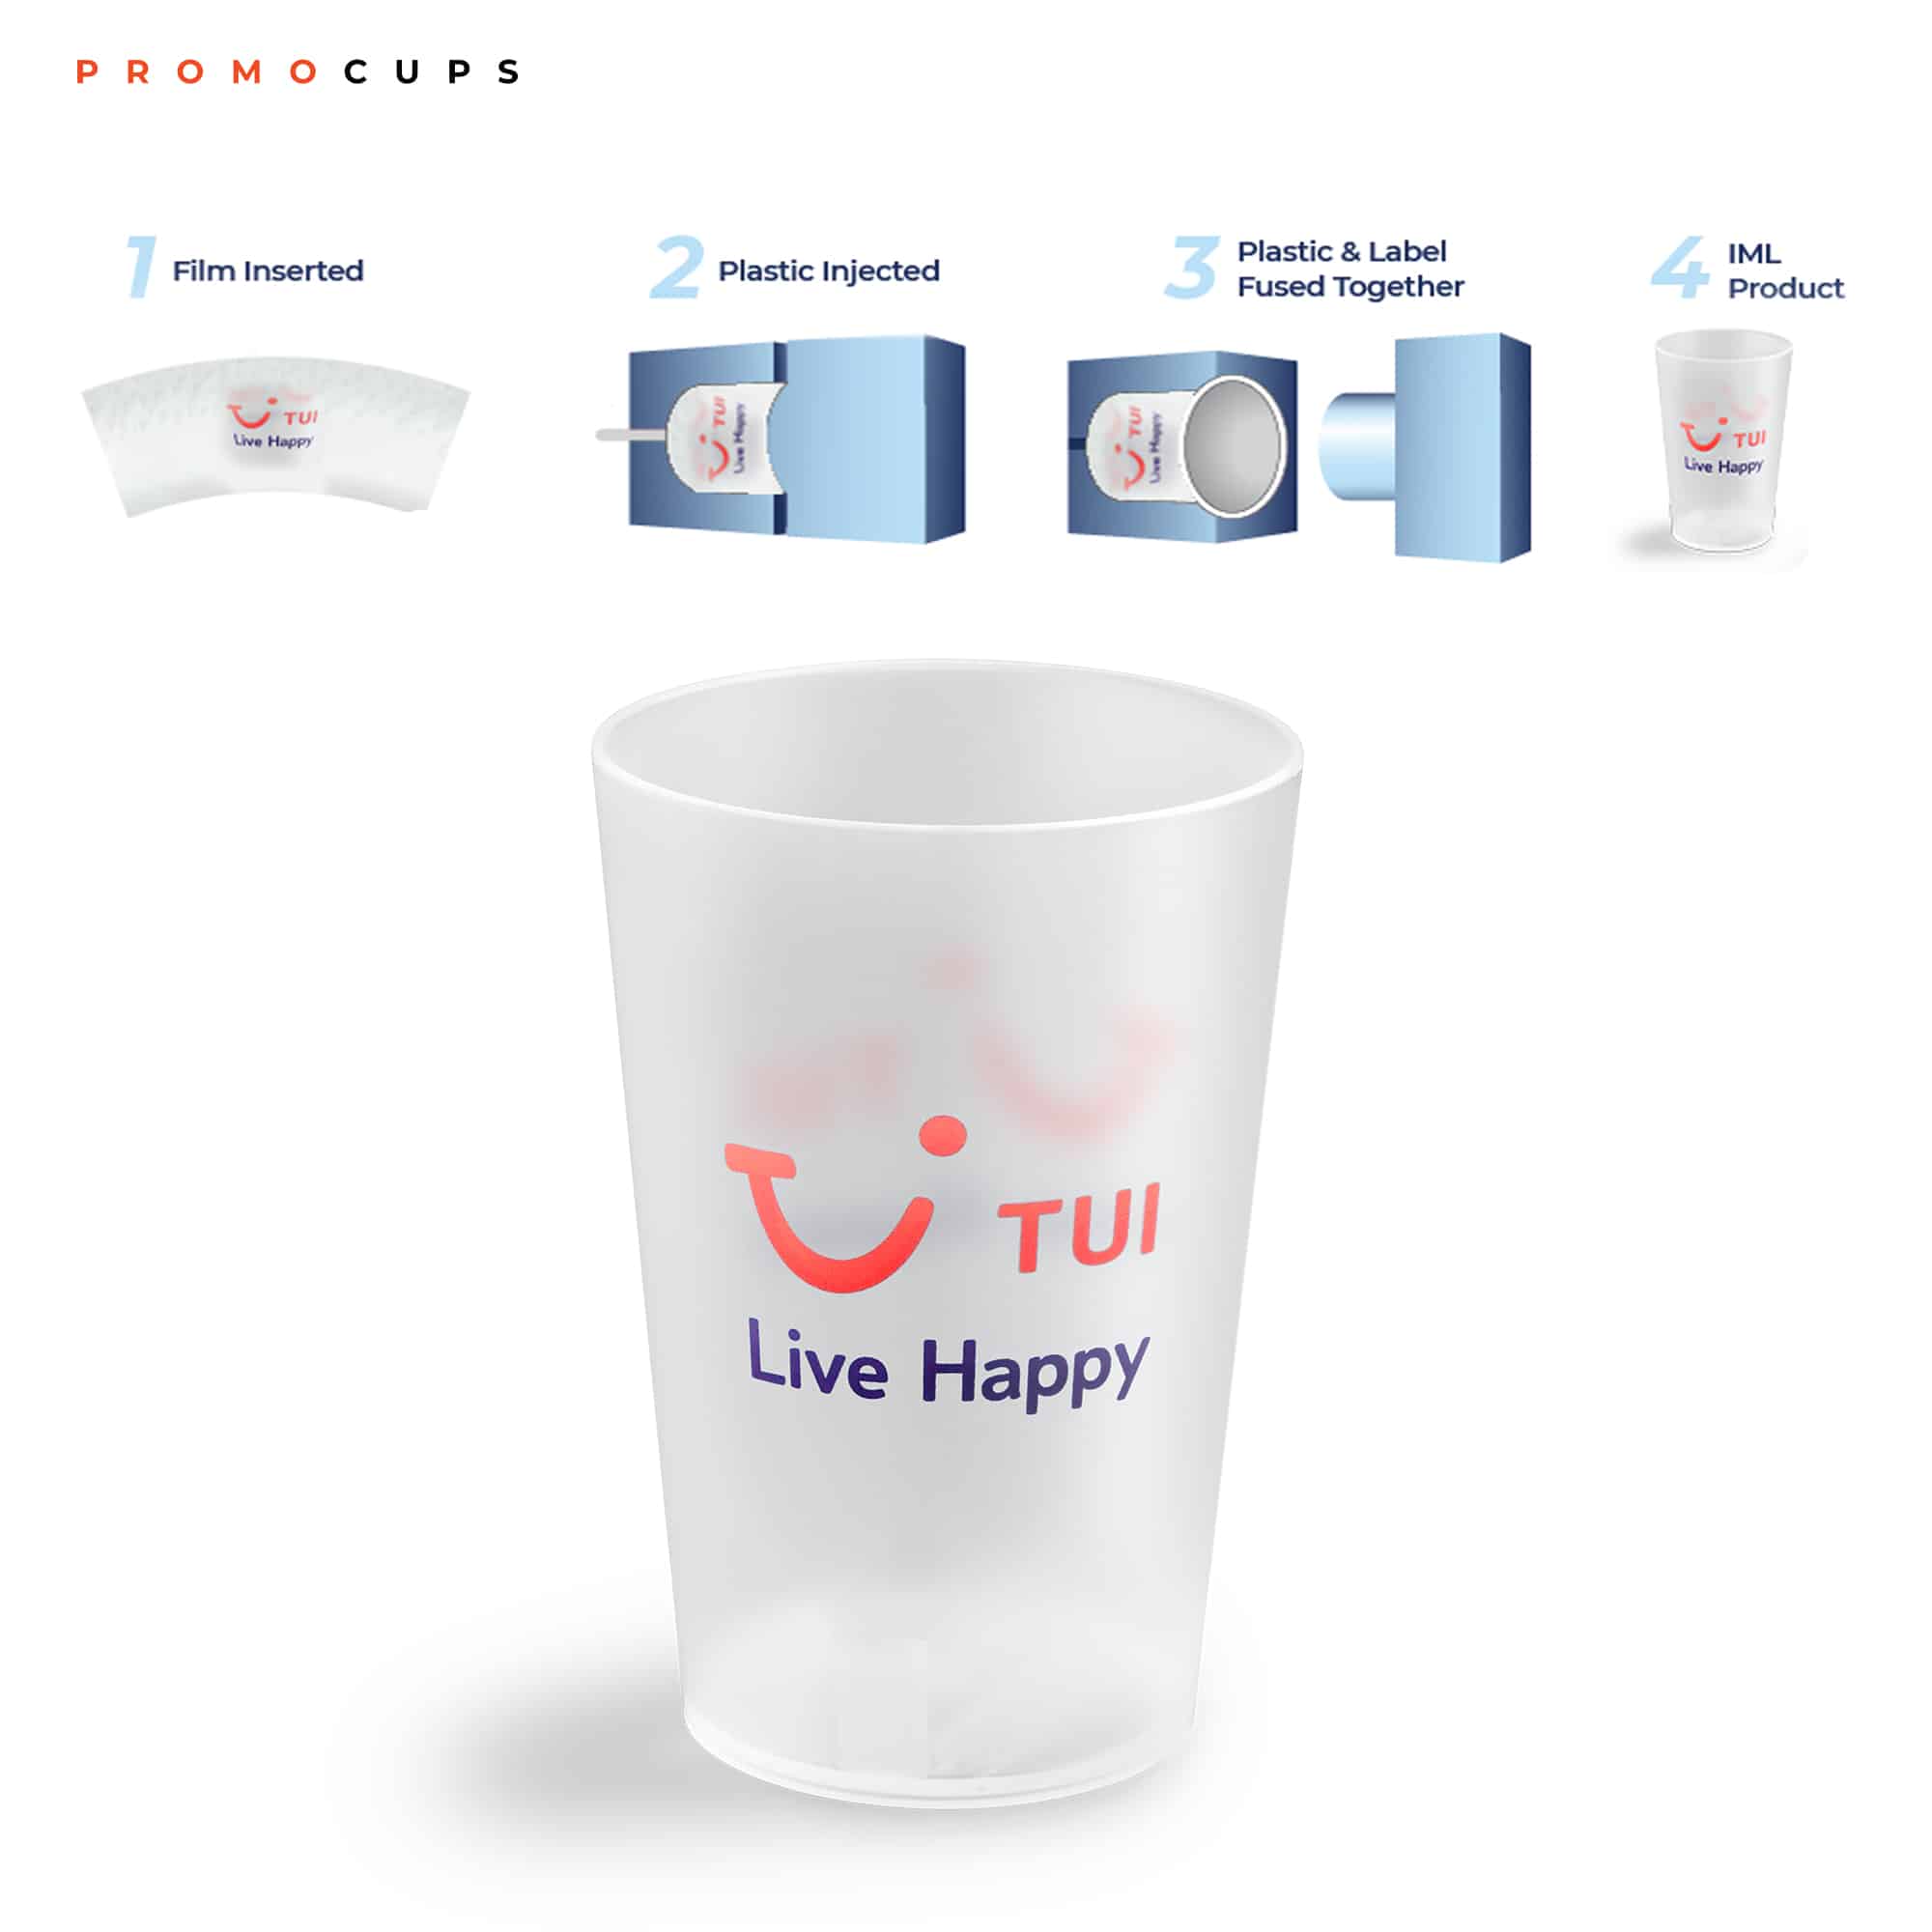 IML Printing on PP cups: what does that mean?